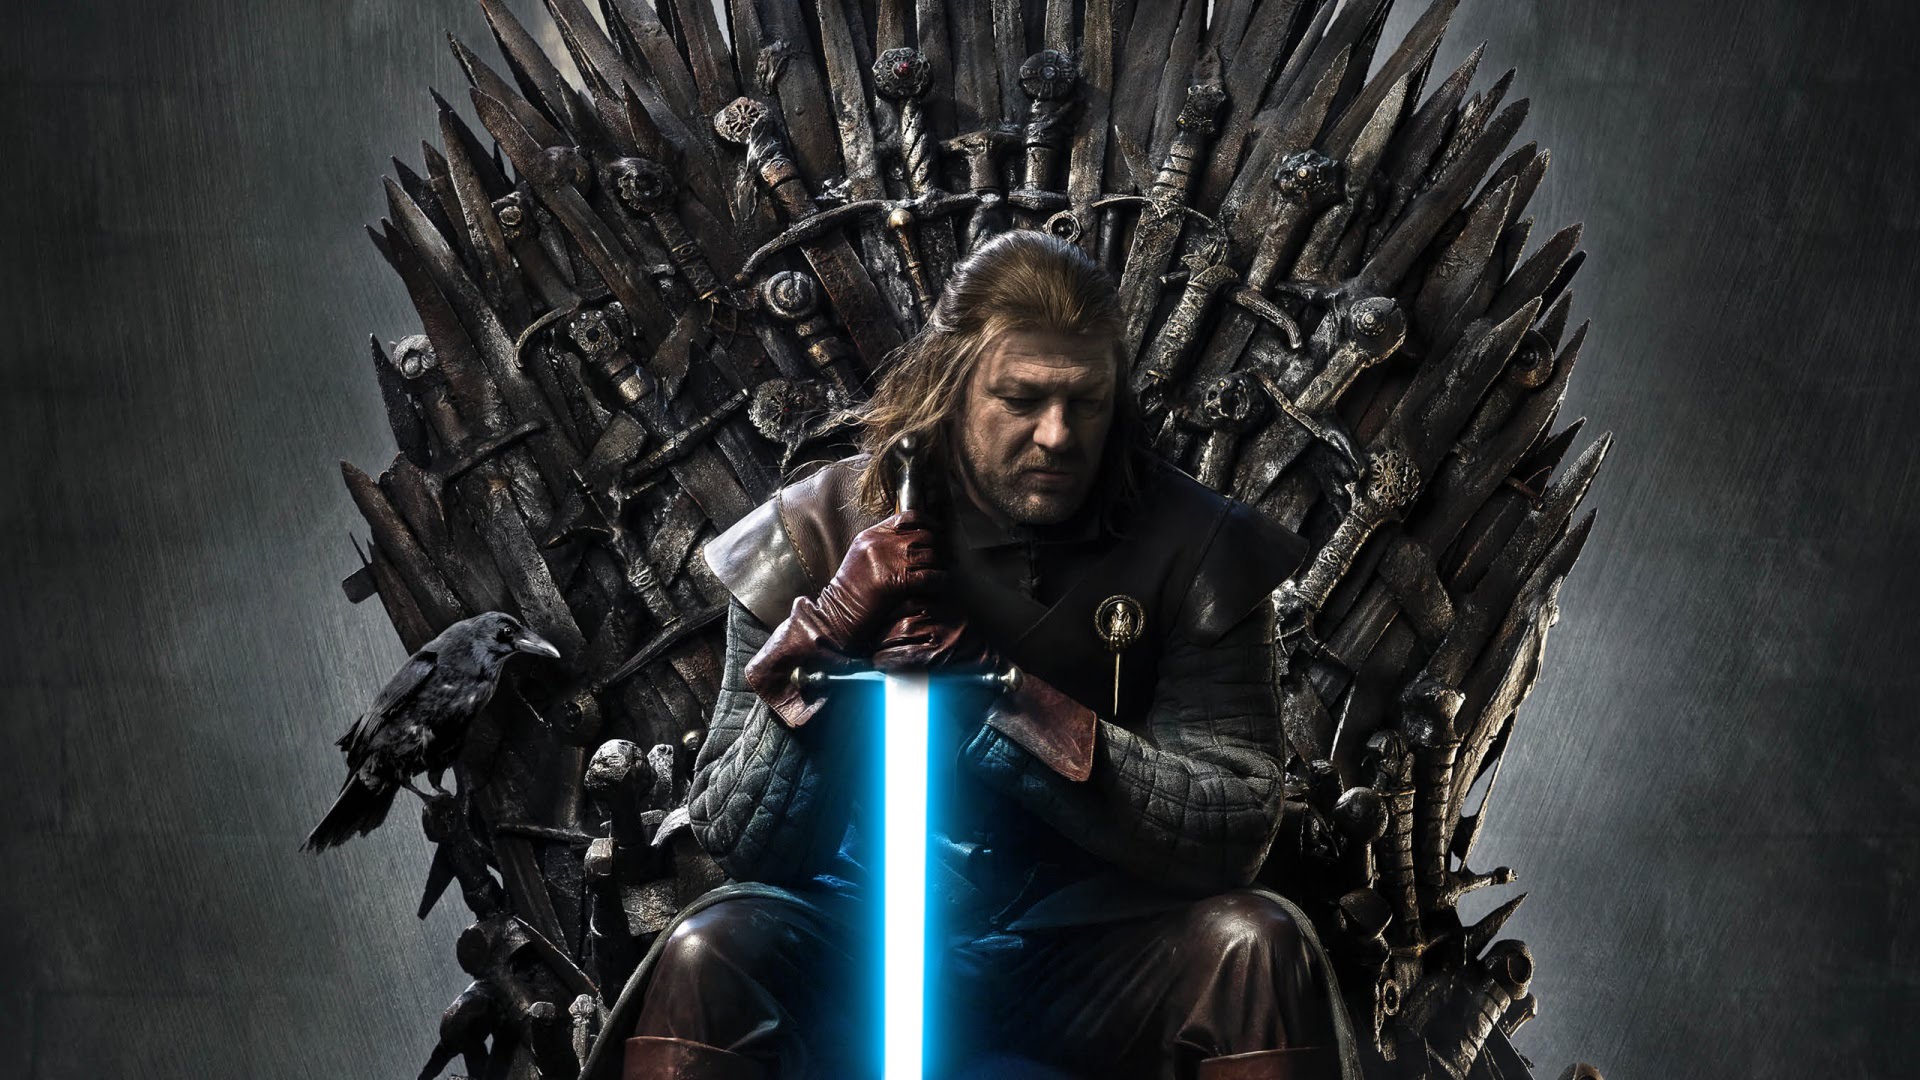 Watch These Epic Game Of Thrones &amp; Star Wars Mashups - A ...